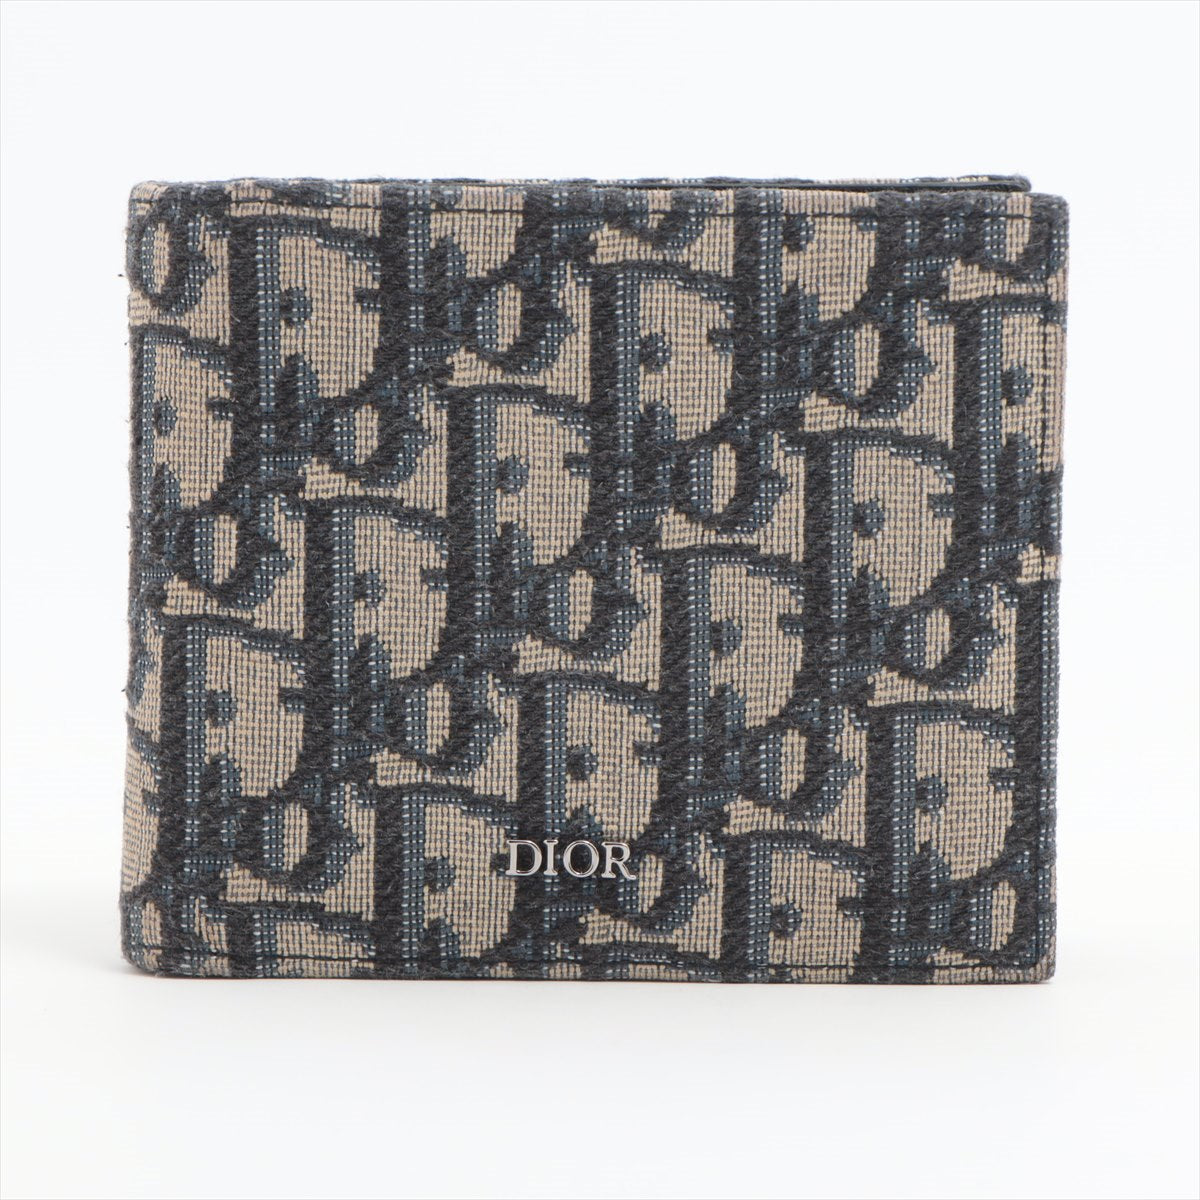 Dior Canvas & Leather Wallet Navy Blue